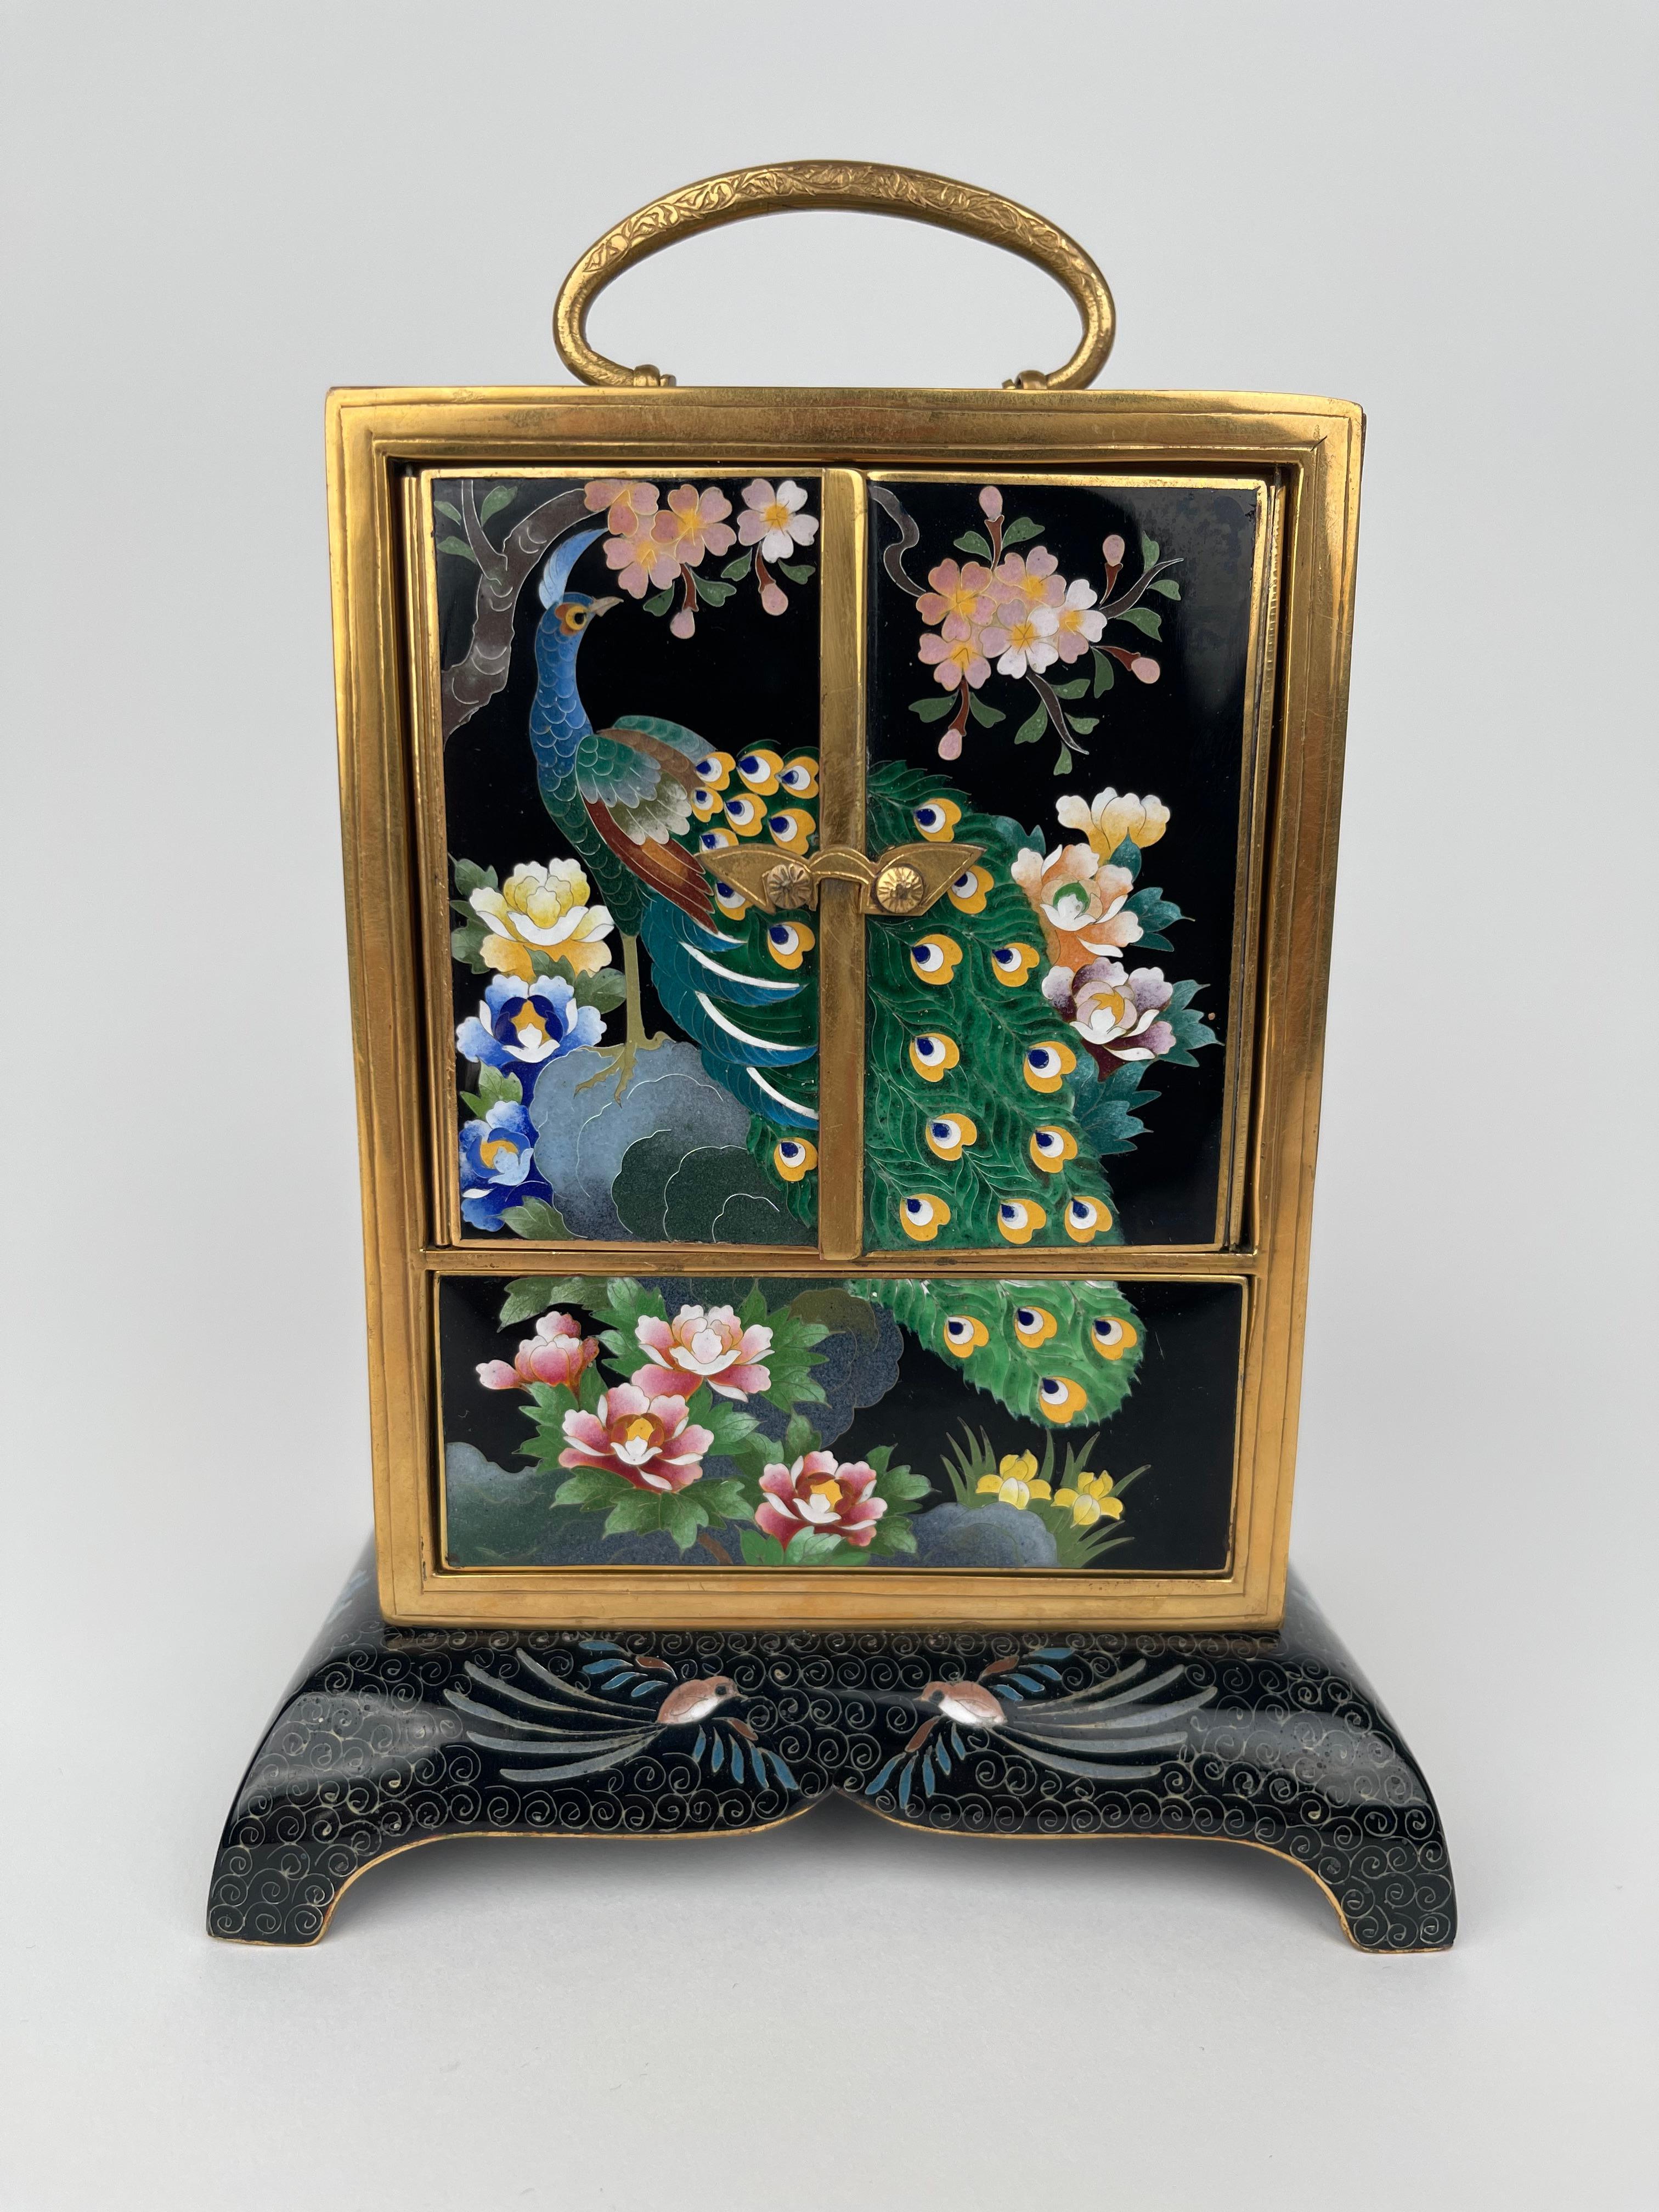 A Rare Meiji Gilt Bronze & Cloisonné Enamel Musical Jewelry Box.

 Japan, Circa 1900
________________________________________________
The Meiji era is an era of Japanese history that extended from October 23, 1868 to July 30, 1912. The Meiji era